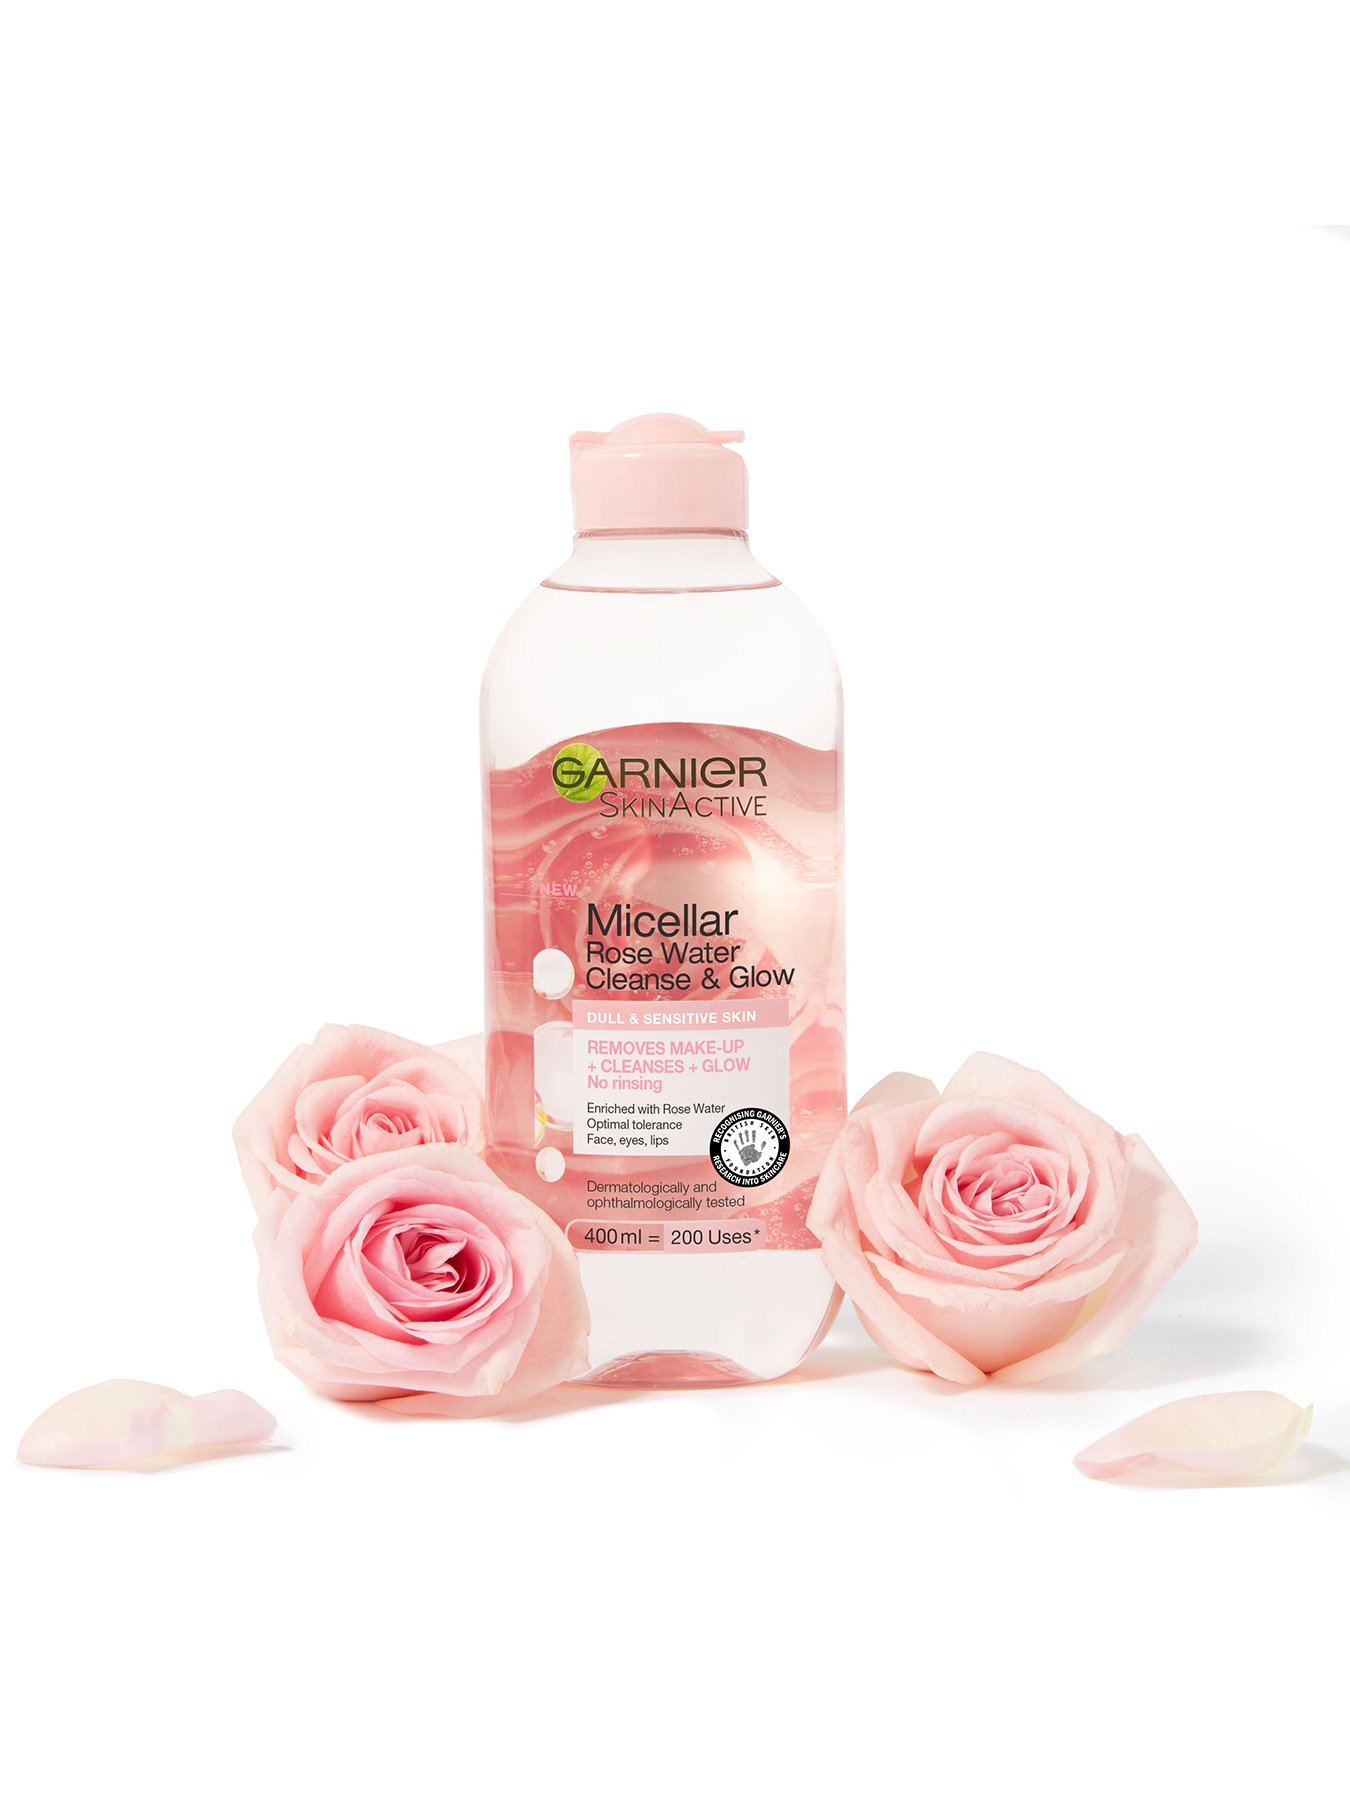 8558 gar products micellar rose packandingredient photo wb 0736 v1 copy